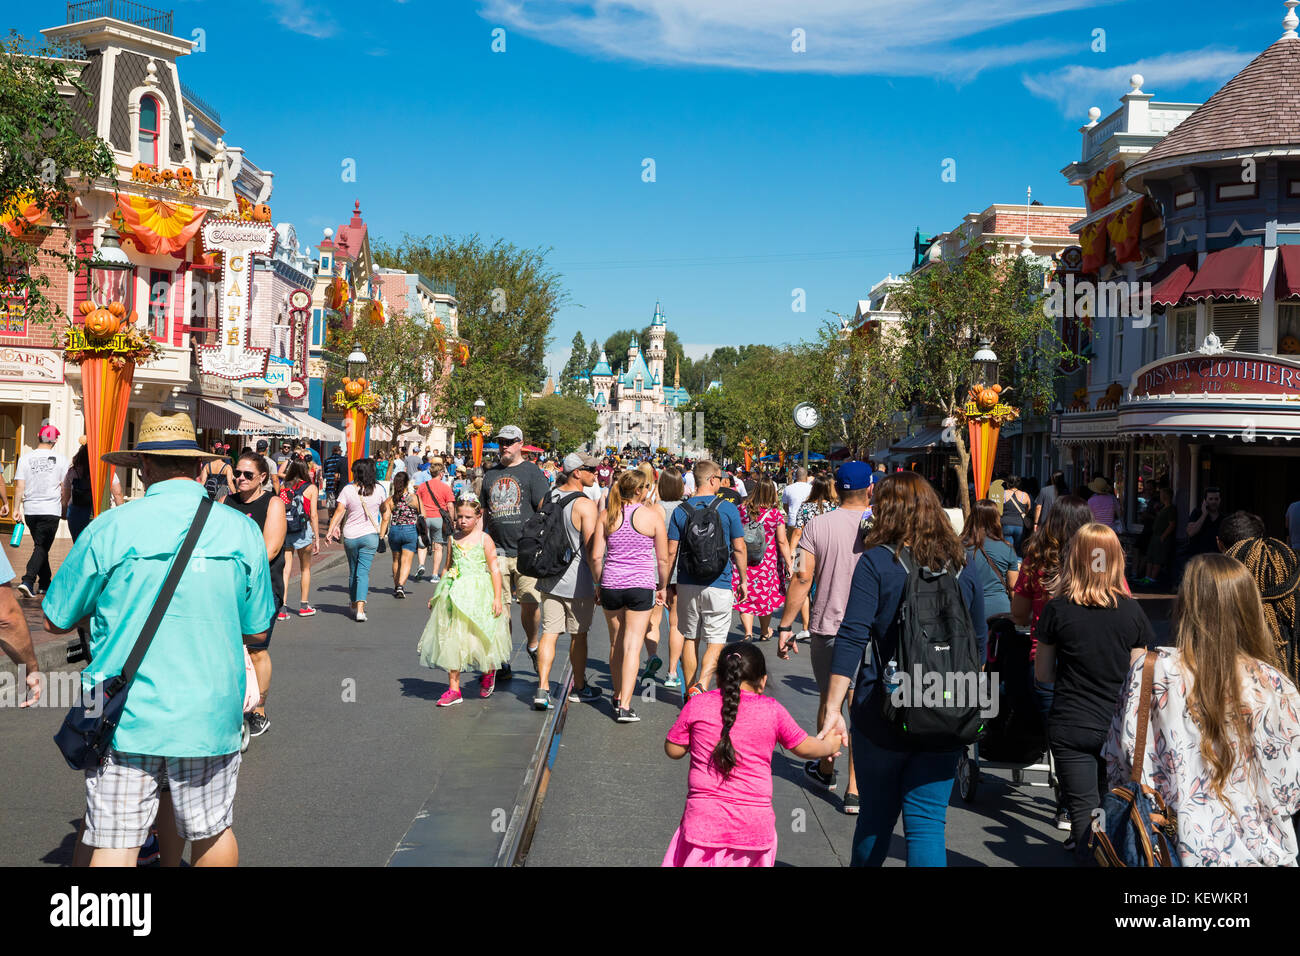 ANAHEIM, CA - OCTOBER 16, 2017: Disneyland's Main Street crowded with guests on a very busy day at the theme park. Stock Photo